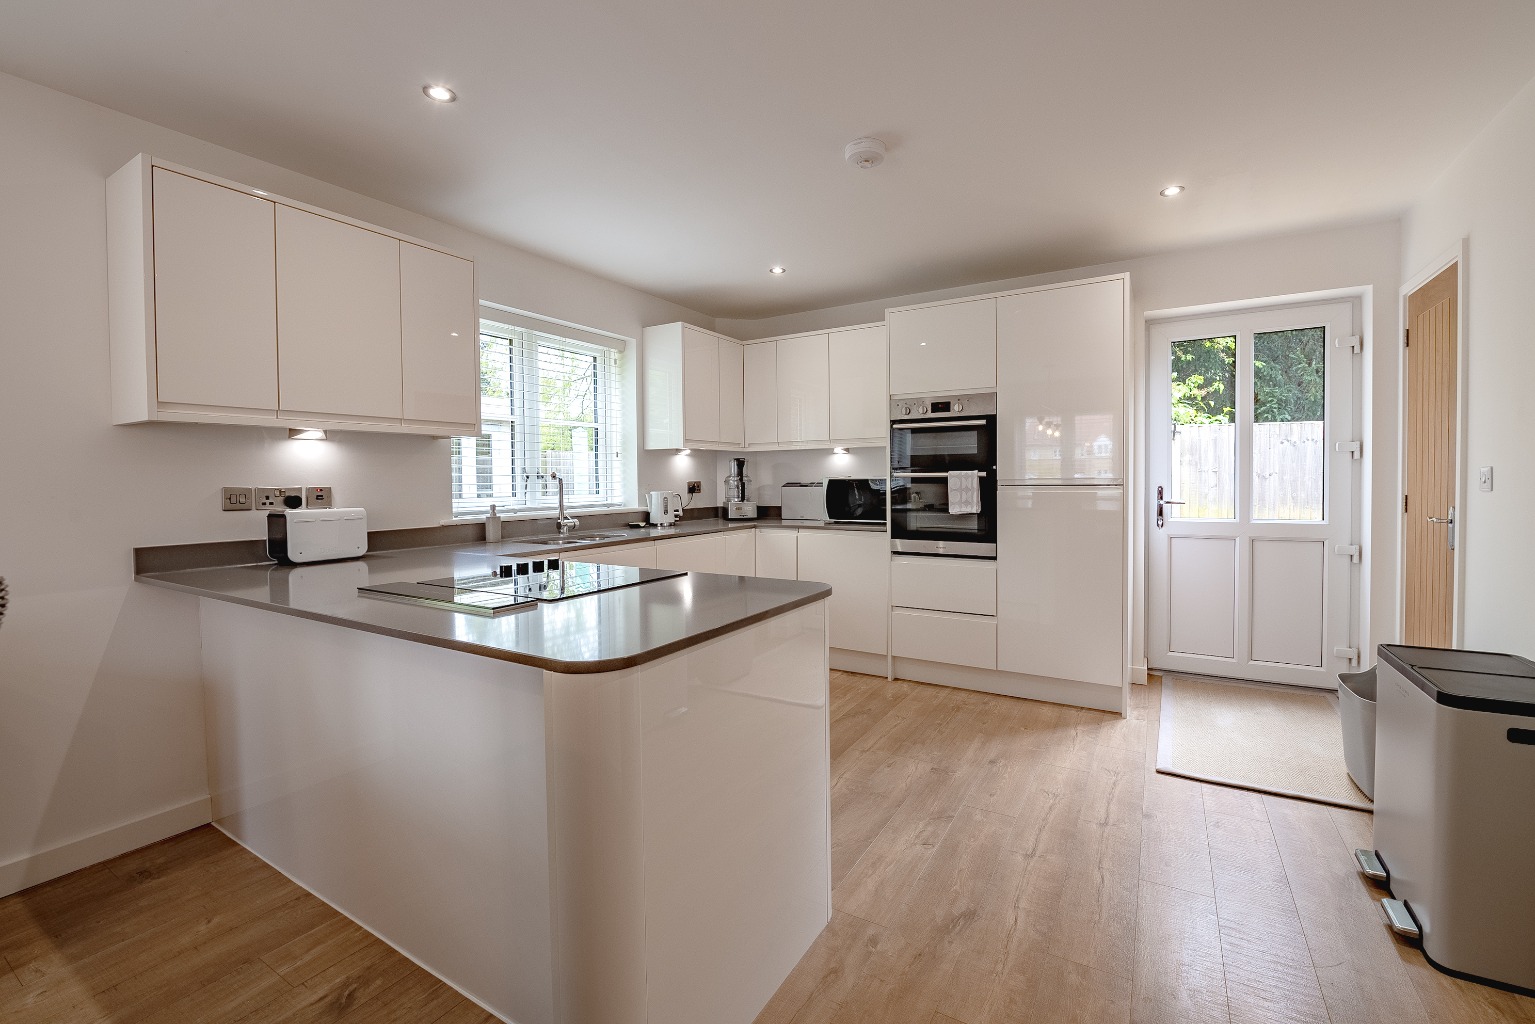 4 bed detached house for sale in The Lane, Bedford - Property Image 1